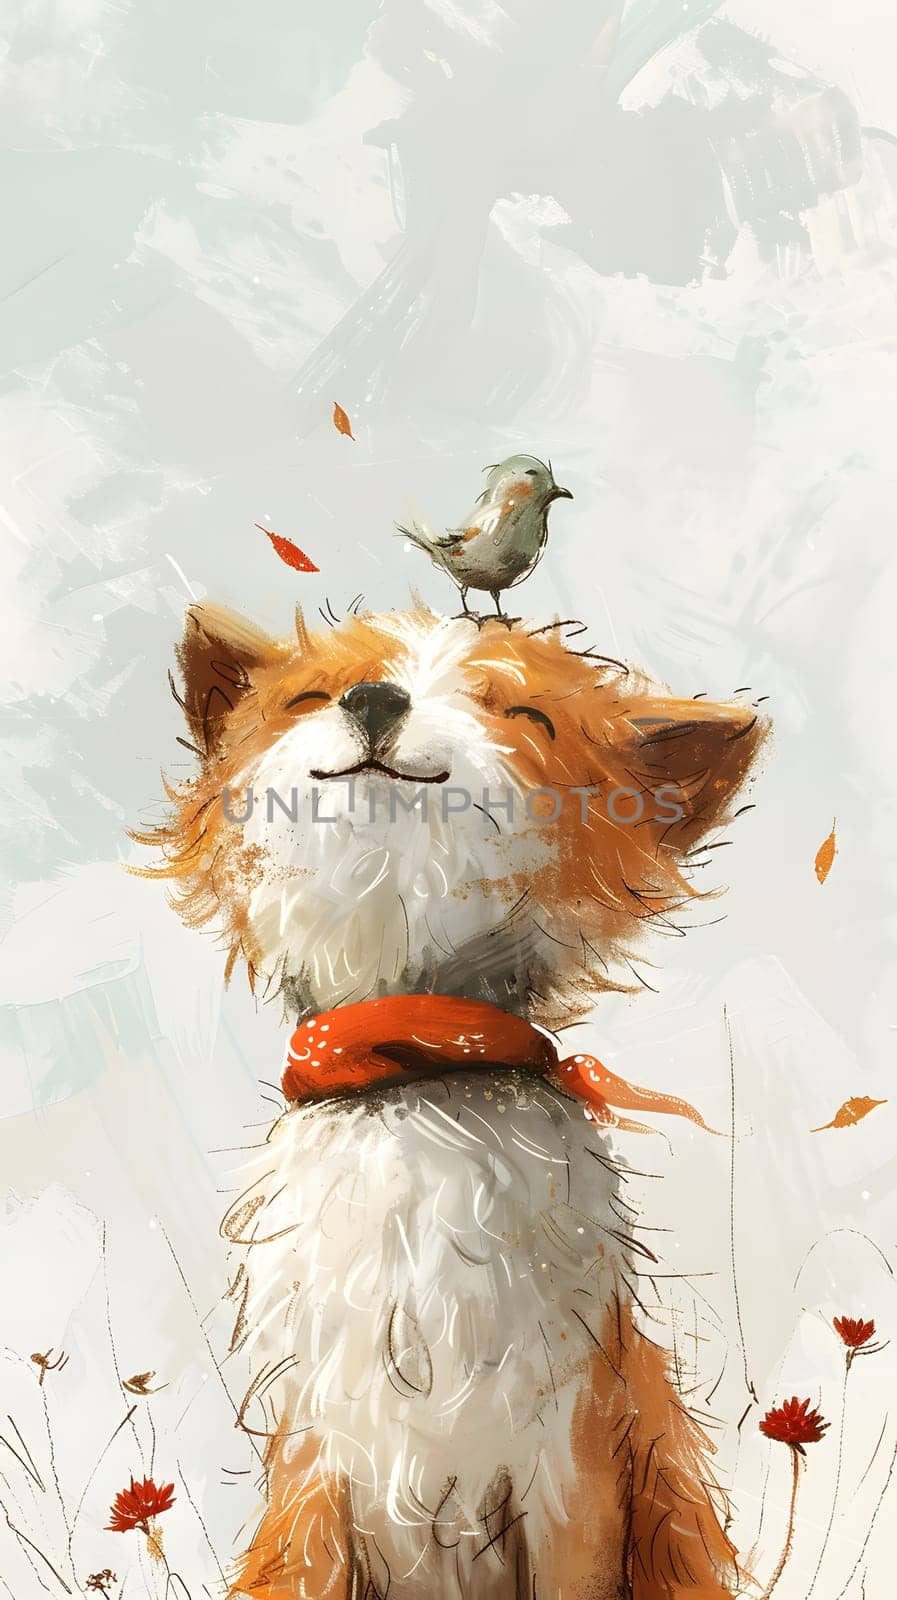 An illustration of a carnivore, a fox, with a bird perched on its head. The art depicts a unique interaction between two animals, showcasing the beauty of nature through painting